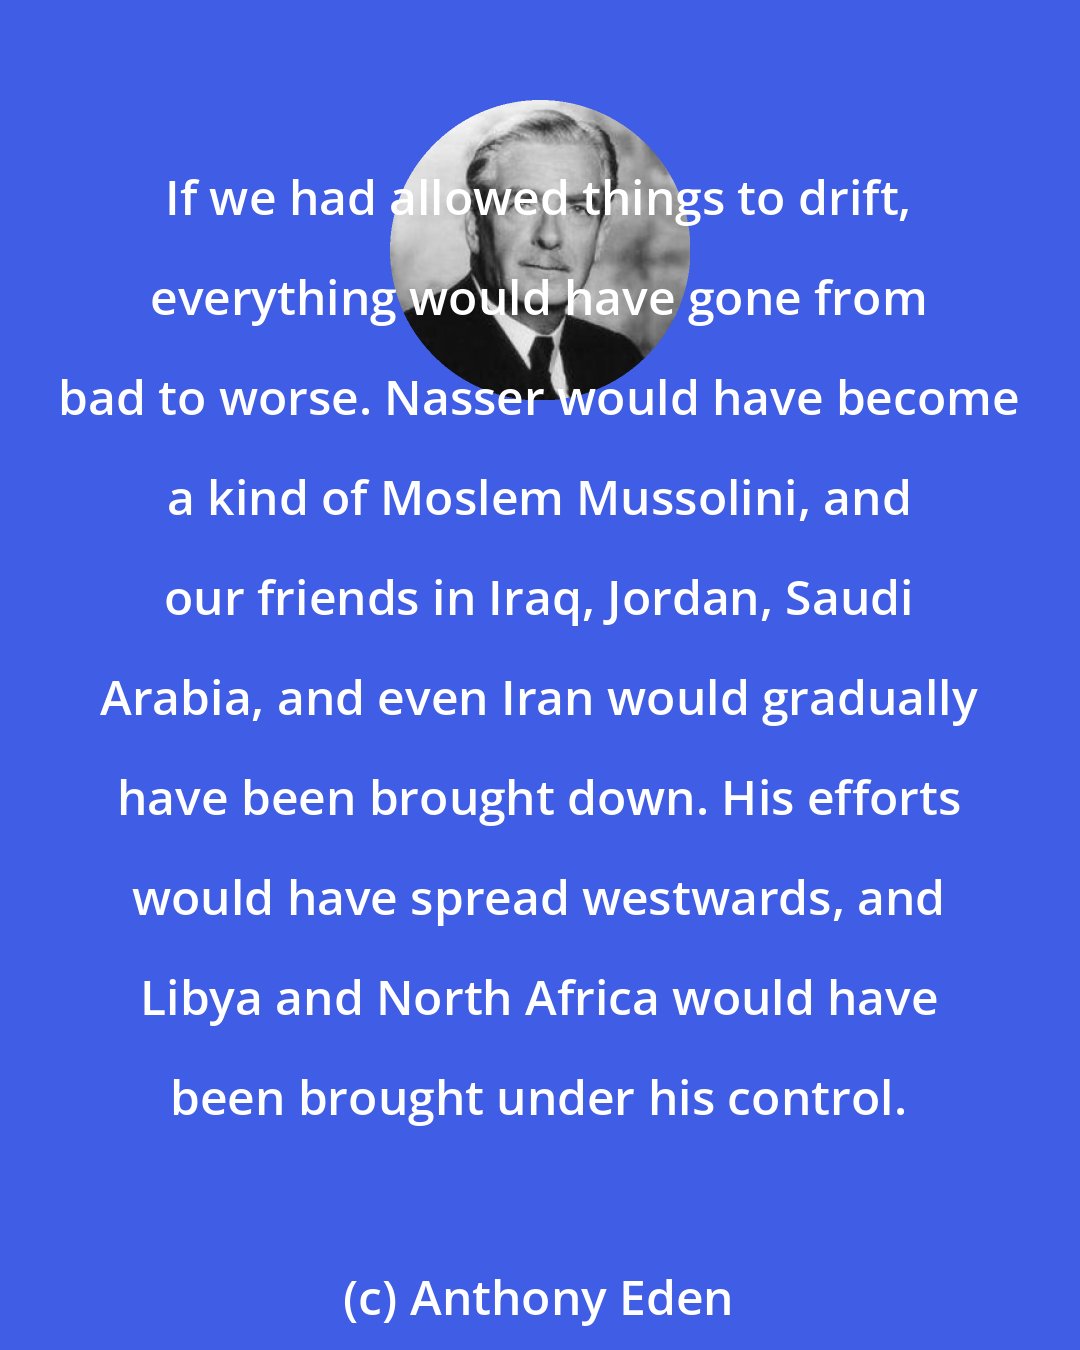 Anthony Eden: If we had allowed things to drift, everything would have gone from bad to worse. Nasser would have become a kind of Moslem Mussolini, and our friends in Iraq, Jordan, Saudi Arabia, and even Iran would gradually have been brought down. His efforts would have spread westwards, and Libya and North Africa would have been brought under his control.